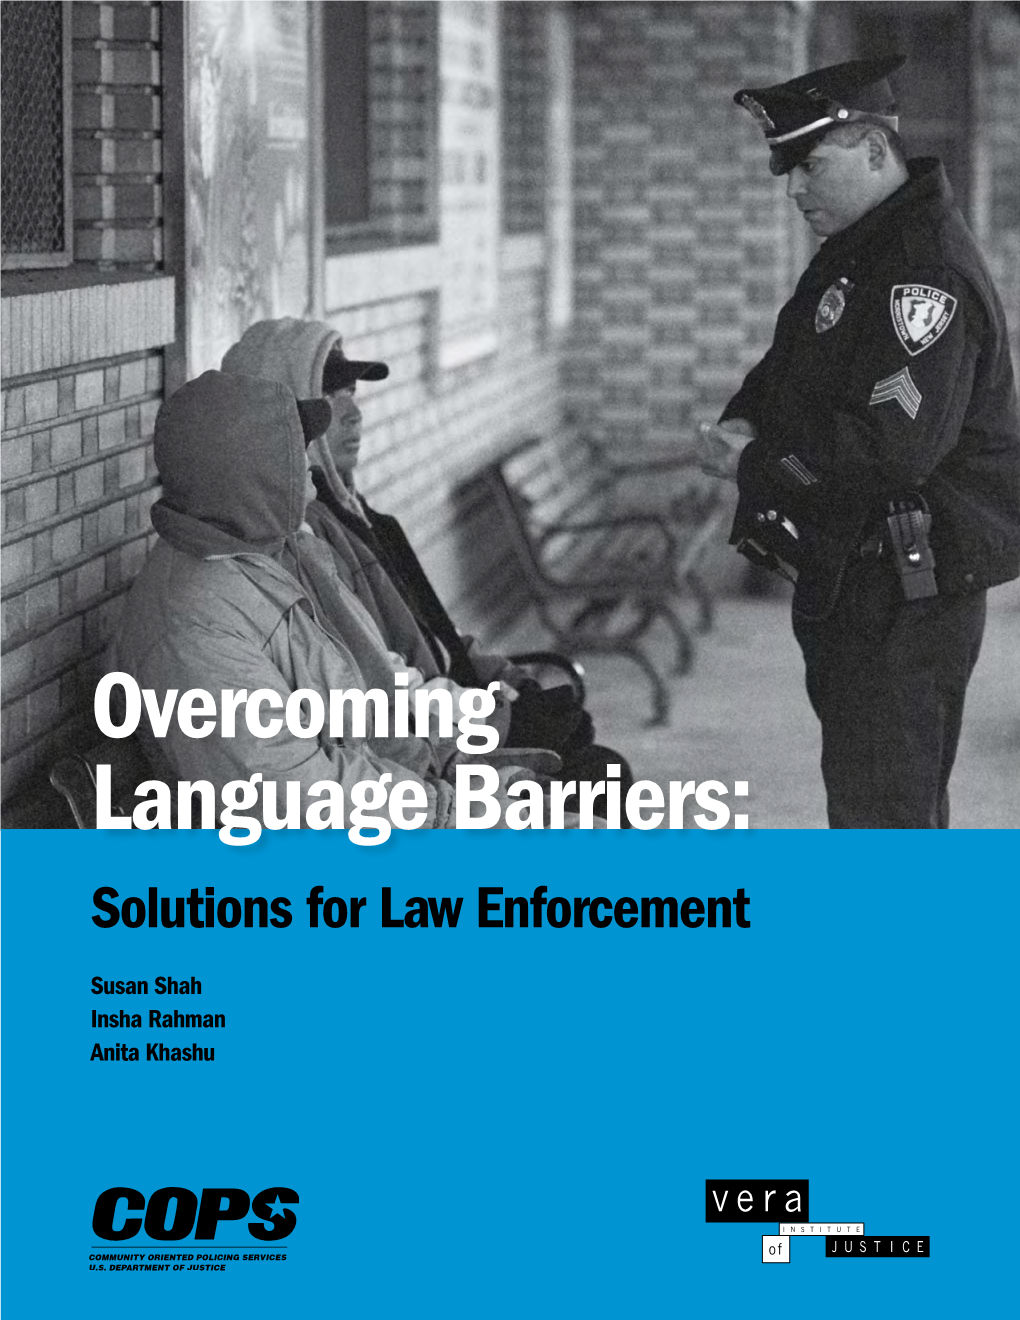 Overcoming Language Barriers: Solutions for Law Enforcement